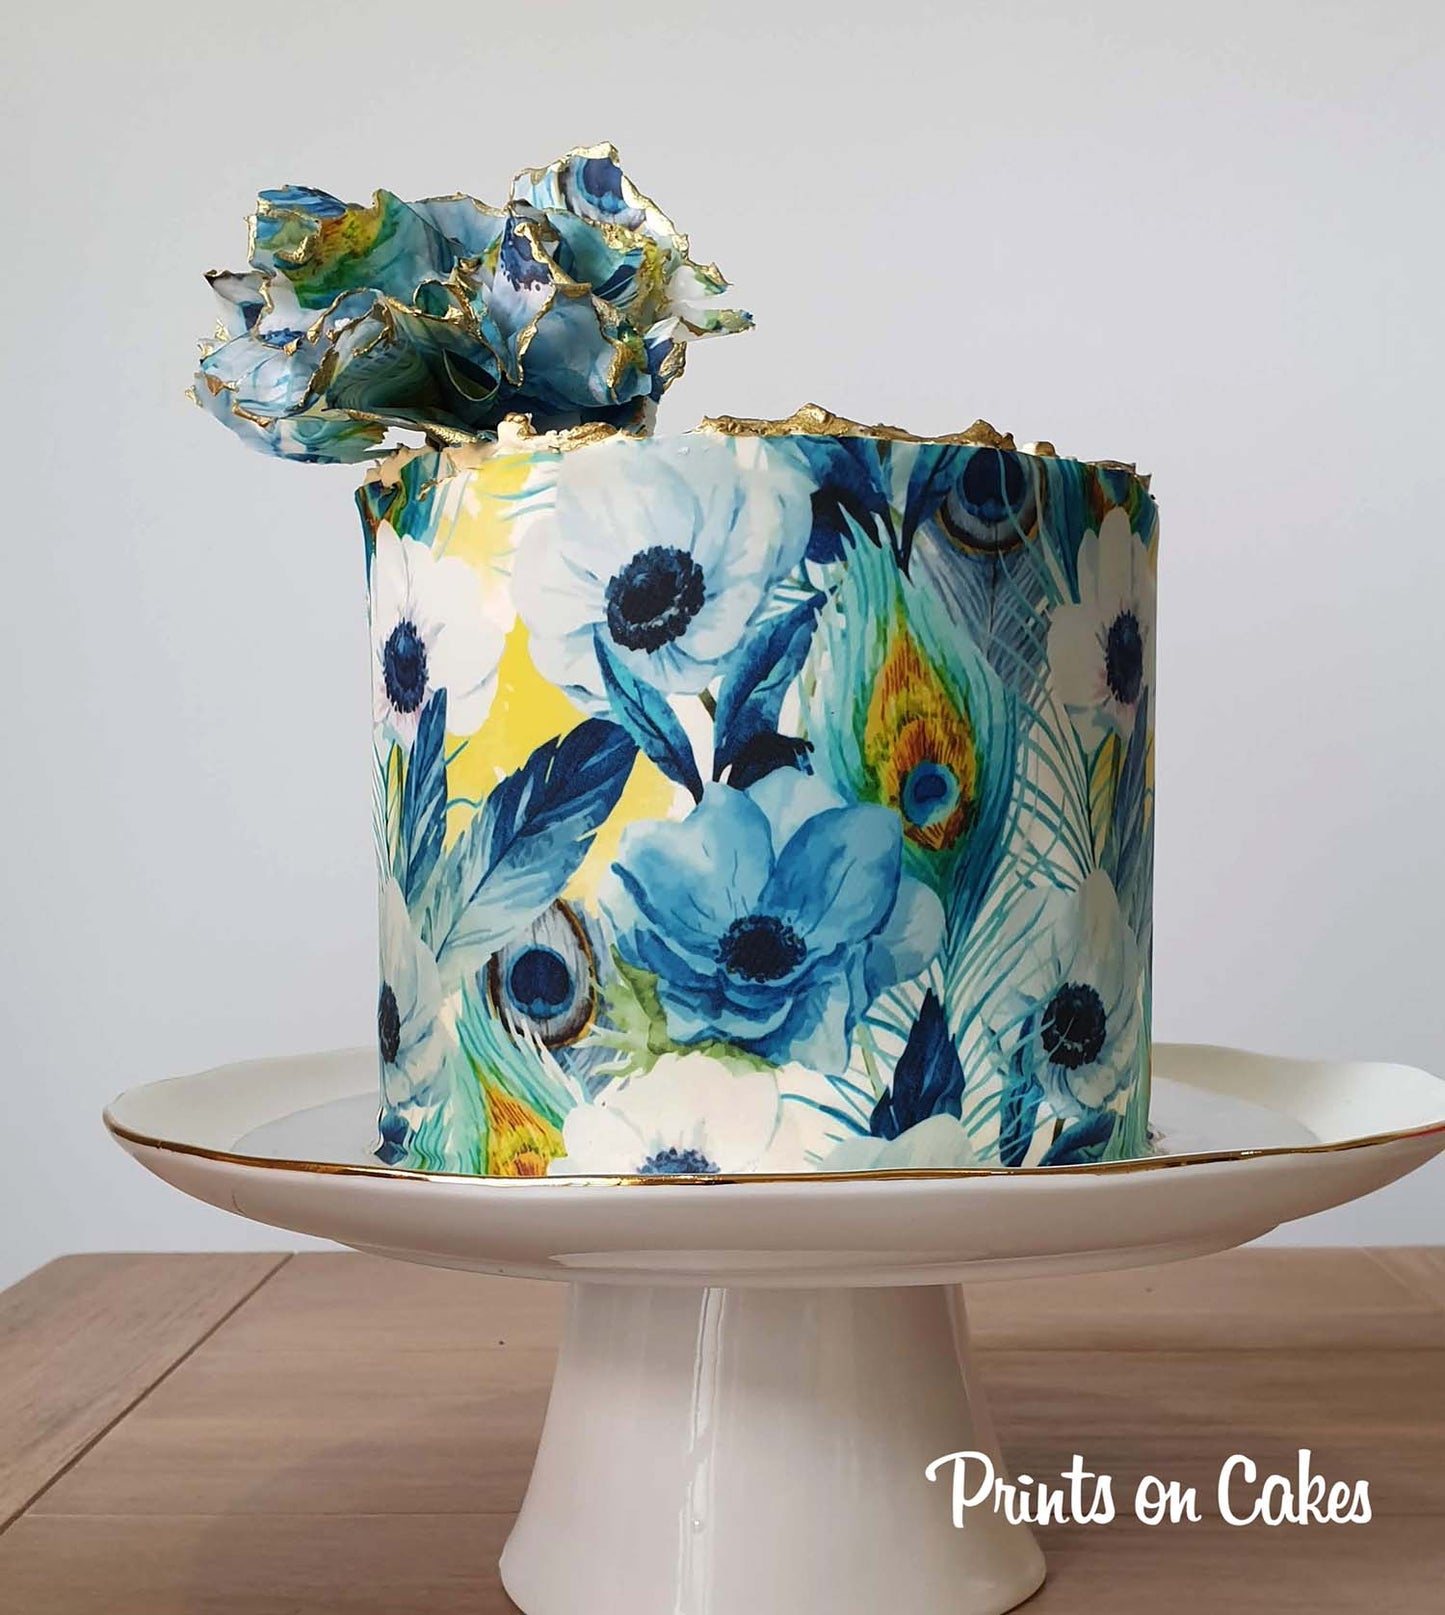 Flowers and Peacock Feathers  - Icing Cake Wrap Edible Cake Topper, Edible Cake Image, ,printsoncakes